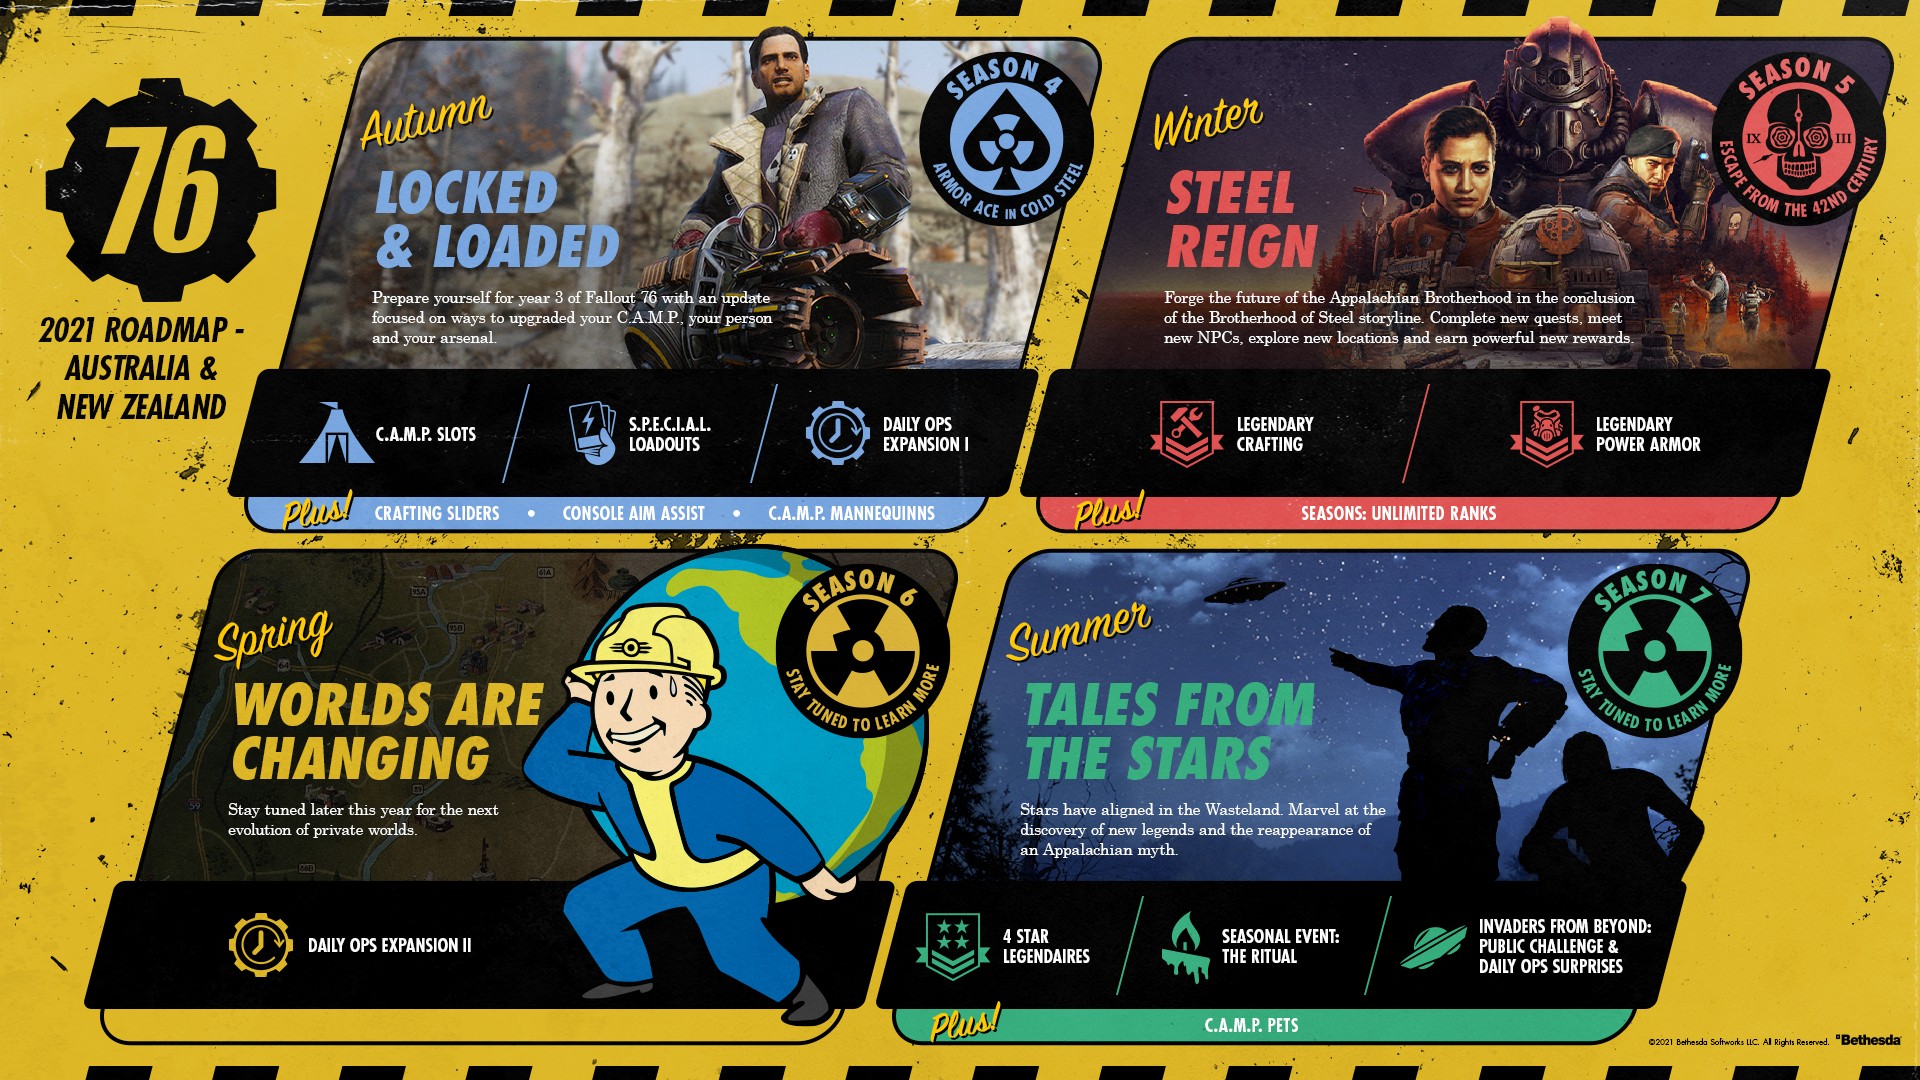 Fallout 76 Content Roadmap for 2021 Revealed